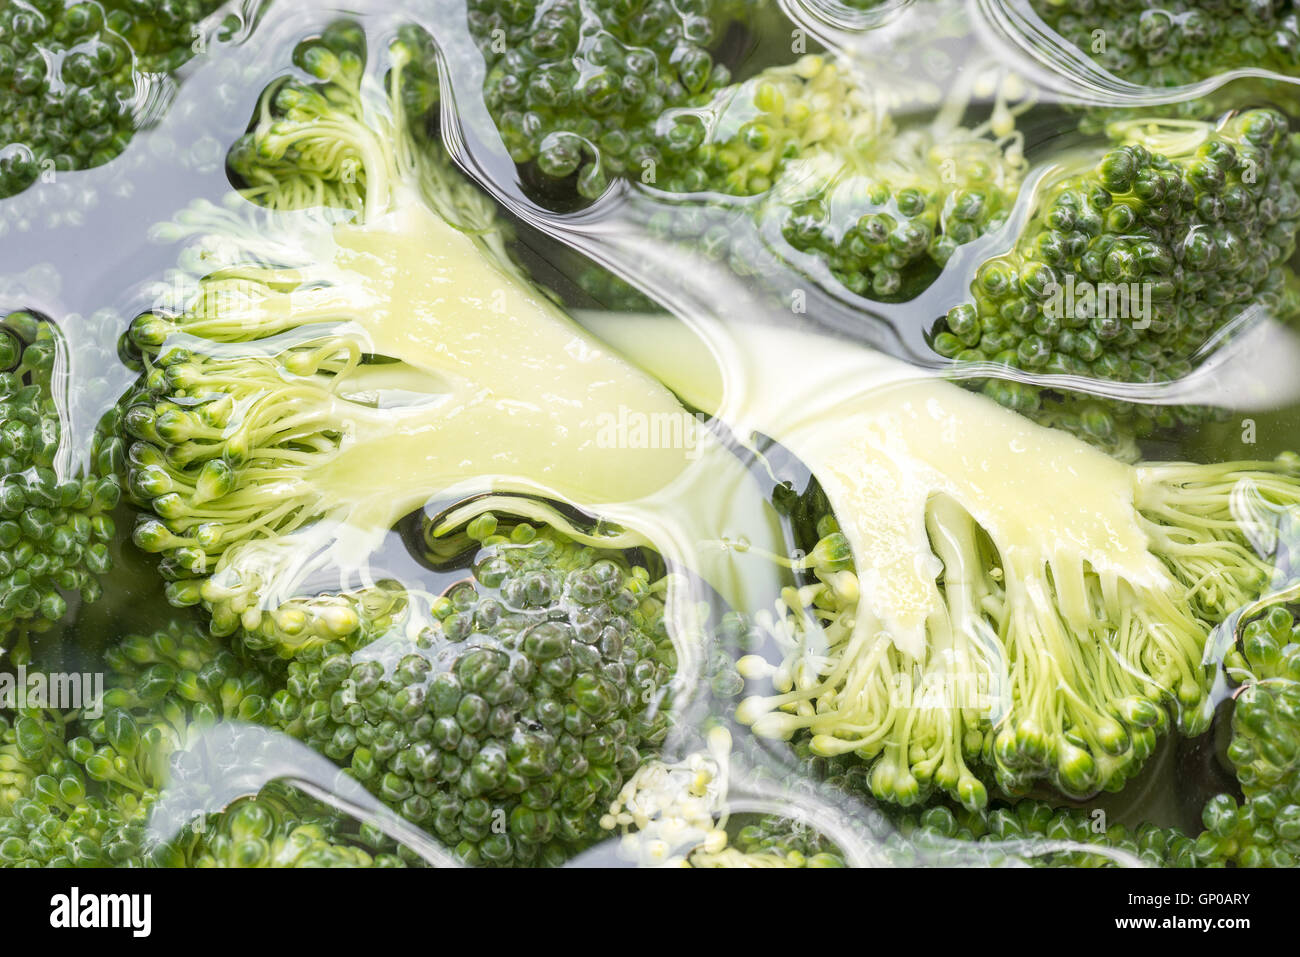 Green broccoli sliced in the water, close up. Stock Photo